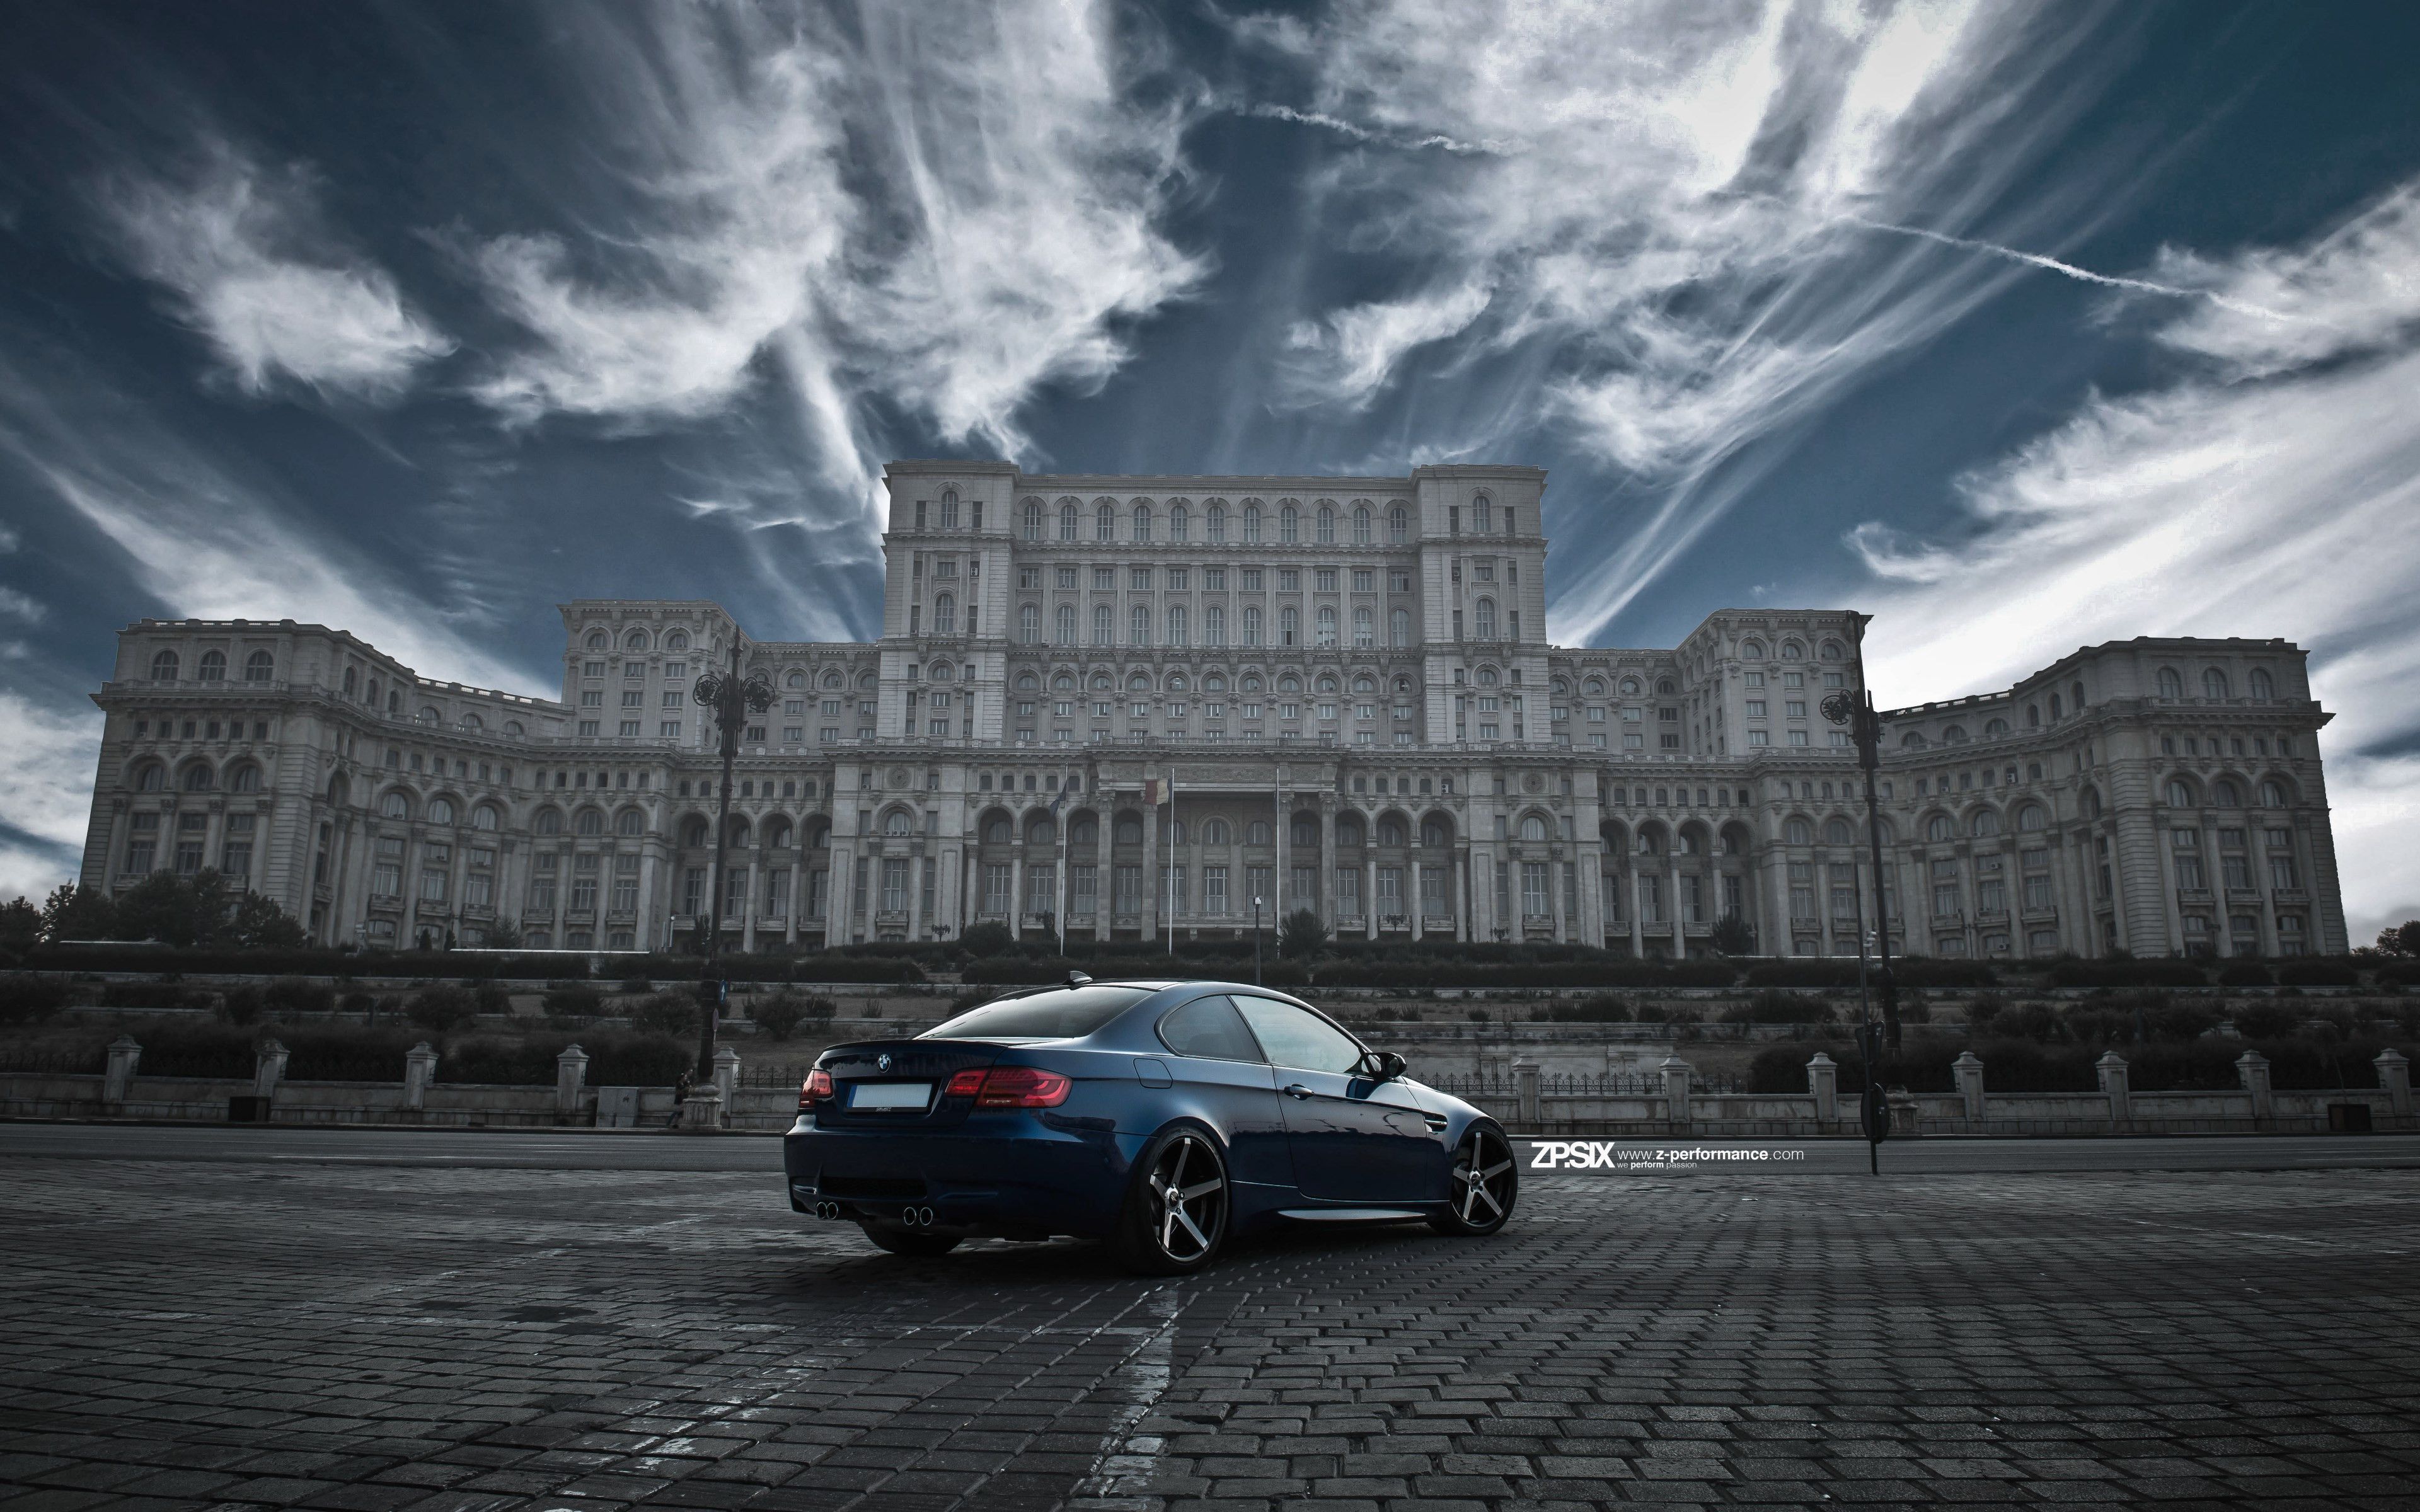 Download wallpaper: BMW E92 M3 in front of Palace of the Parliament 3840x2400